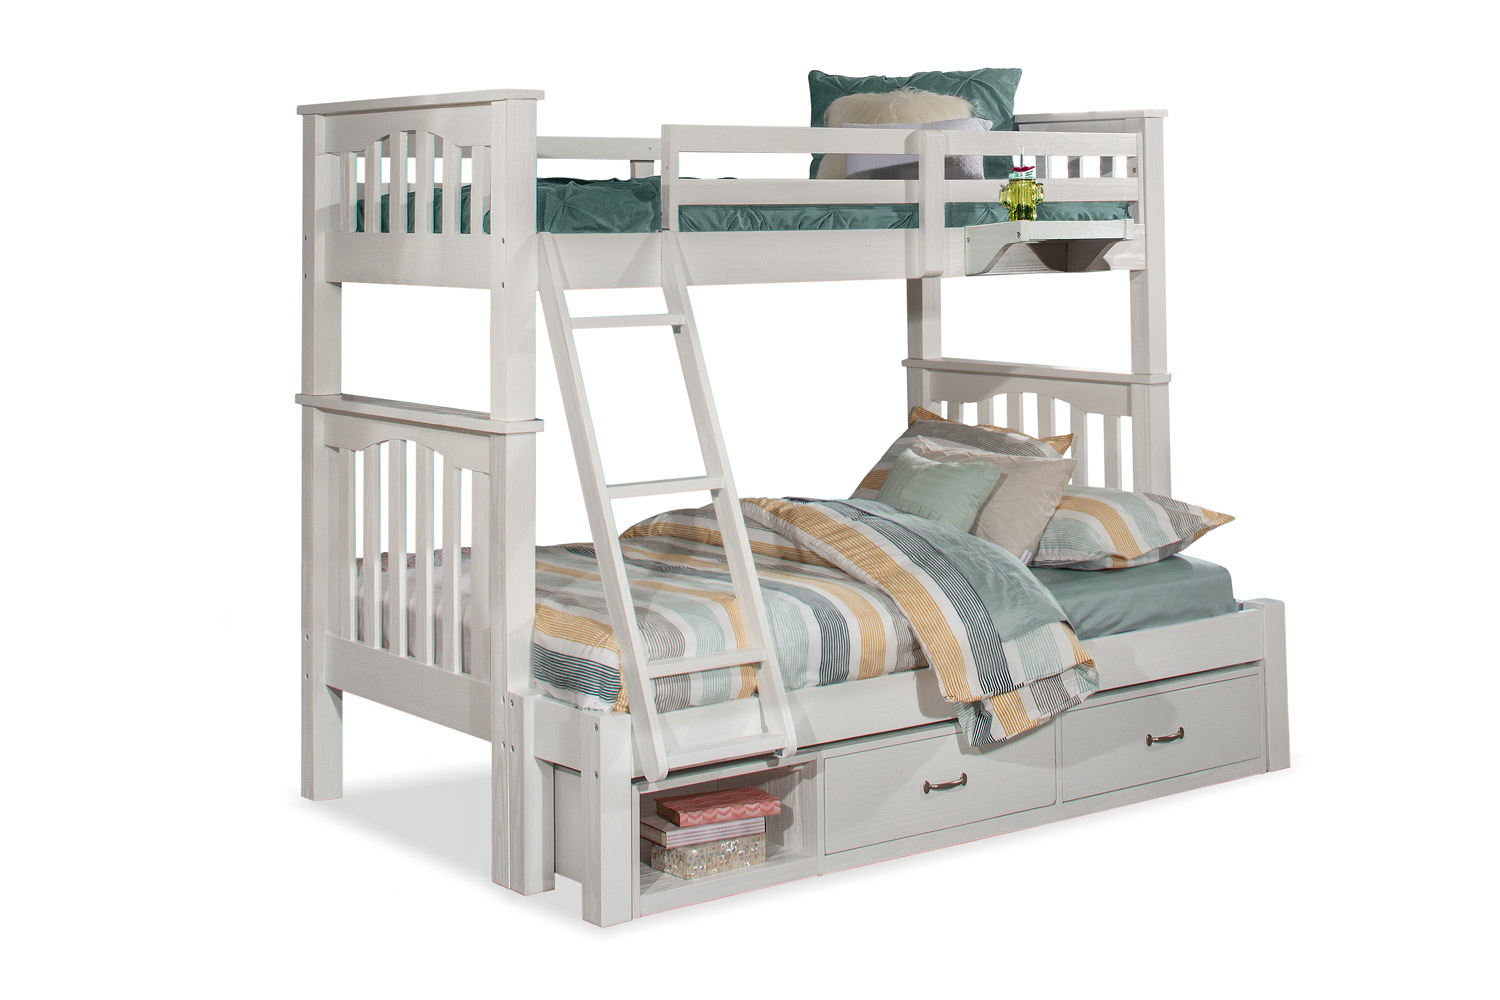 NE Kids Highlands Harper Twin/Full Bunk Bed with Storage Unit and Hanging Nightstand - White Finish